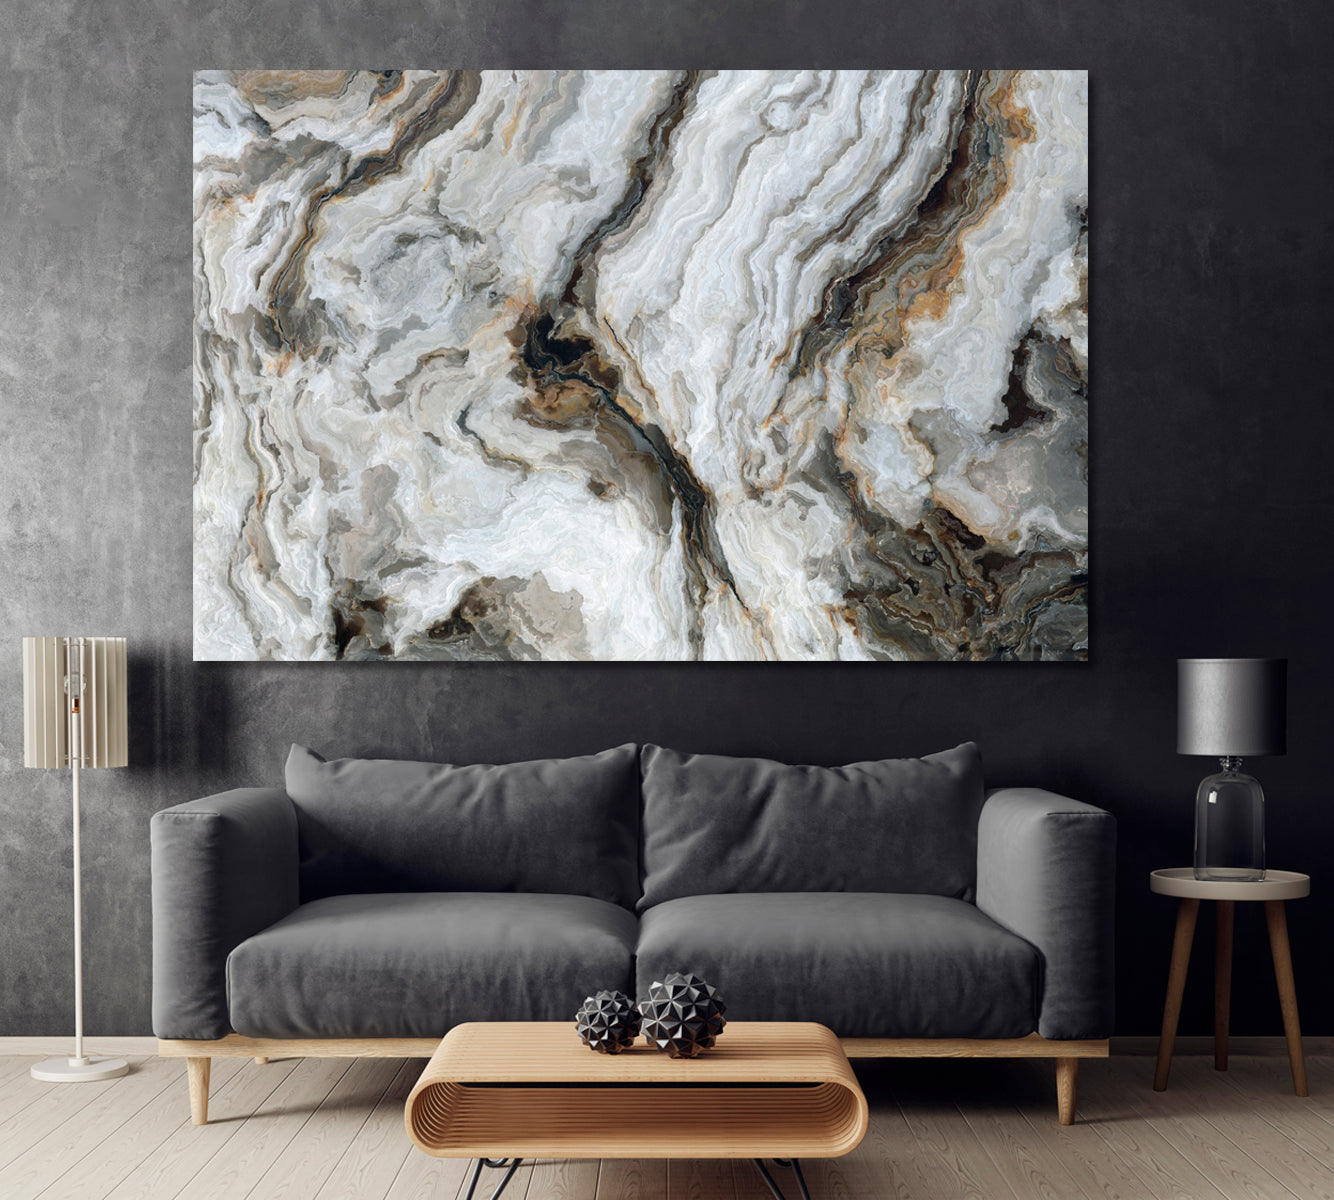 Abstract Marble with Curly Grey Veins Canvas Print ArtLexy 1 Panel 24"x16" inches 